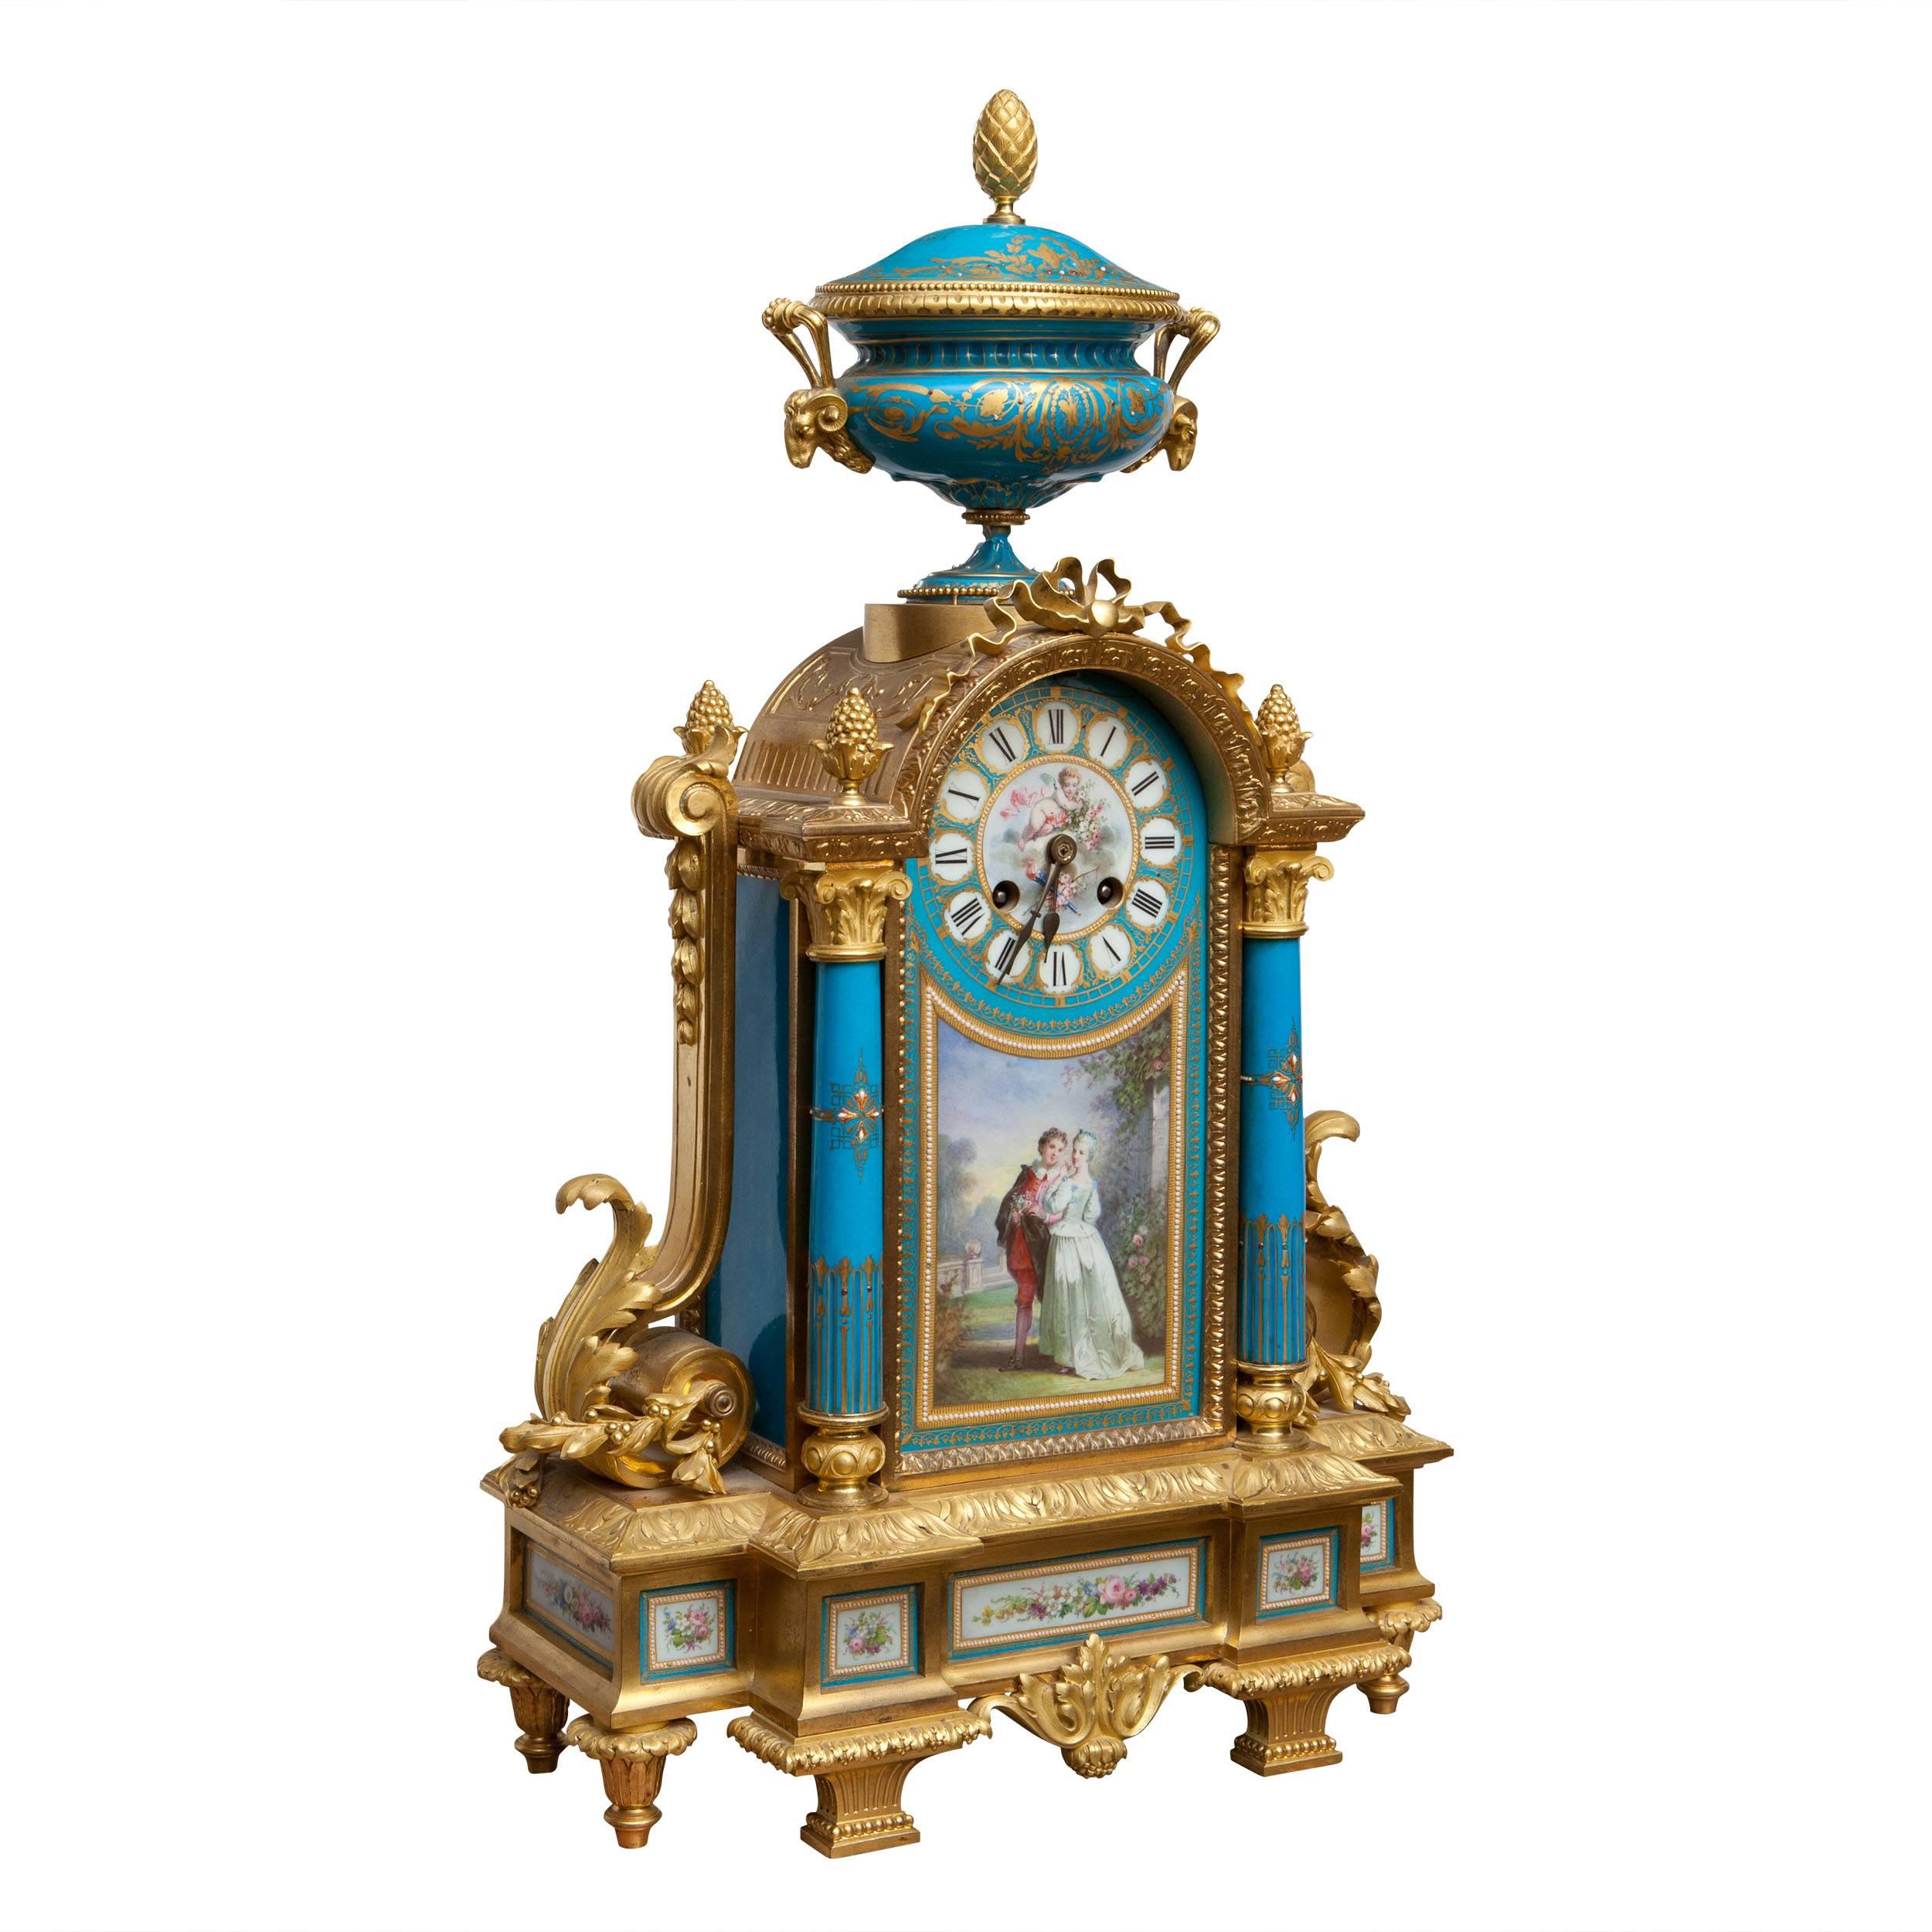 France, circa 1870.

A fine late 19th century ormolu and porcelain mounted mantel clock, the painted dial above a courting couple scene, the whole mounted with a Krater vase and raised on a stepped porcelain mounted base. 

The clock is 54cm